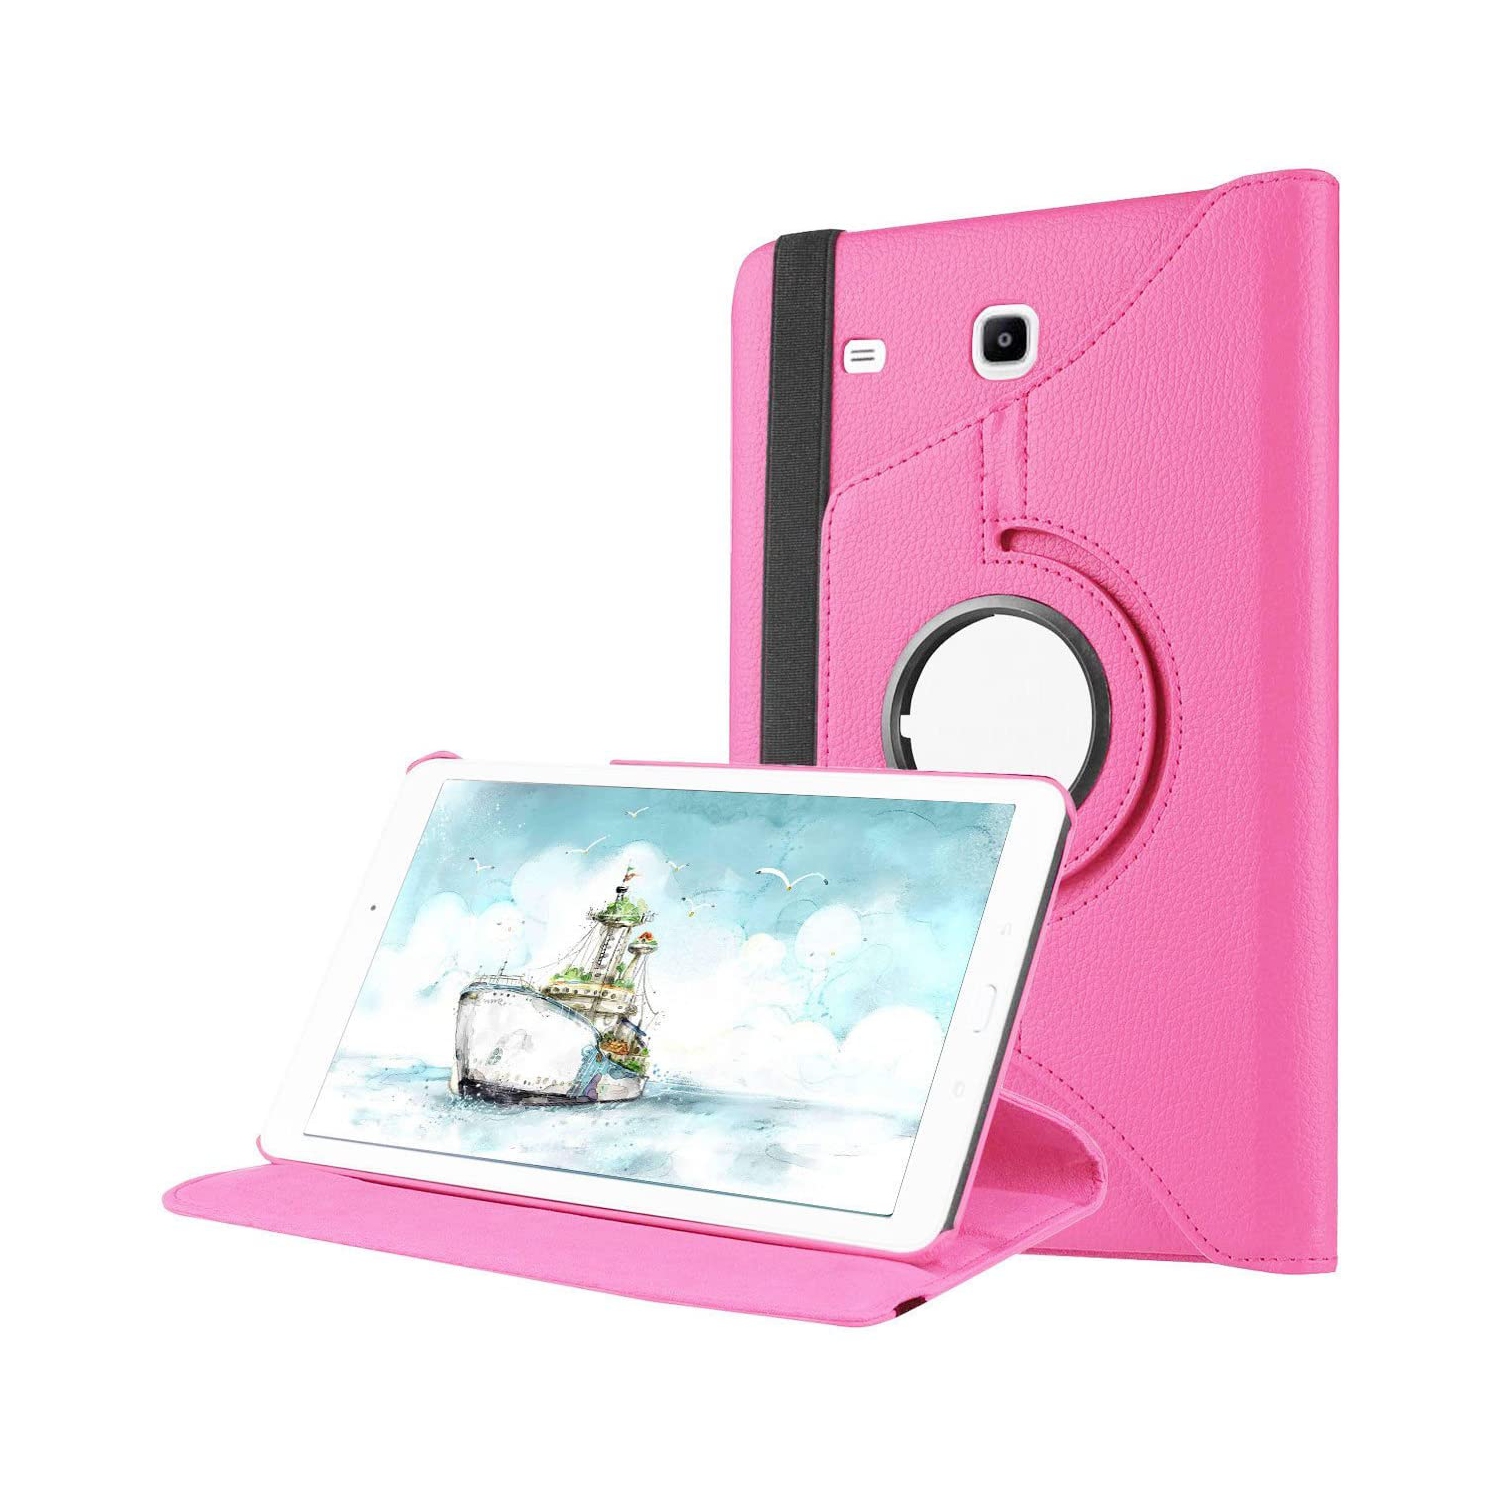 【CSmart】 360 Rotating Leather Tablet Case Smart Stand Cover for Samsung Tab E 9.6" T560 T561 T565, Hot Pink